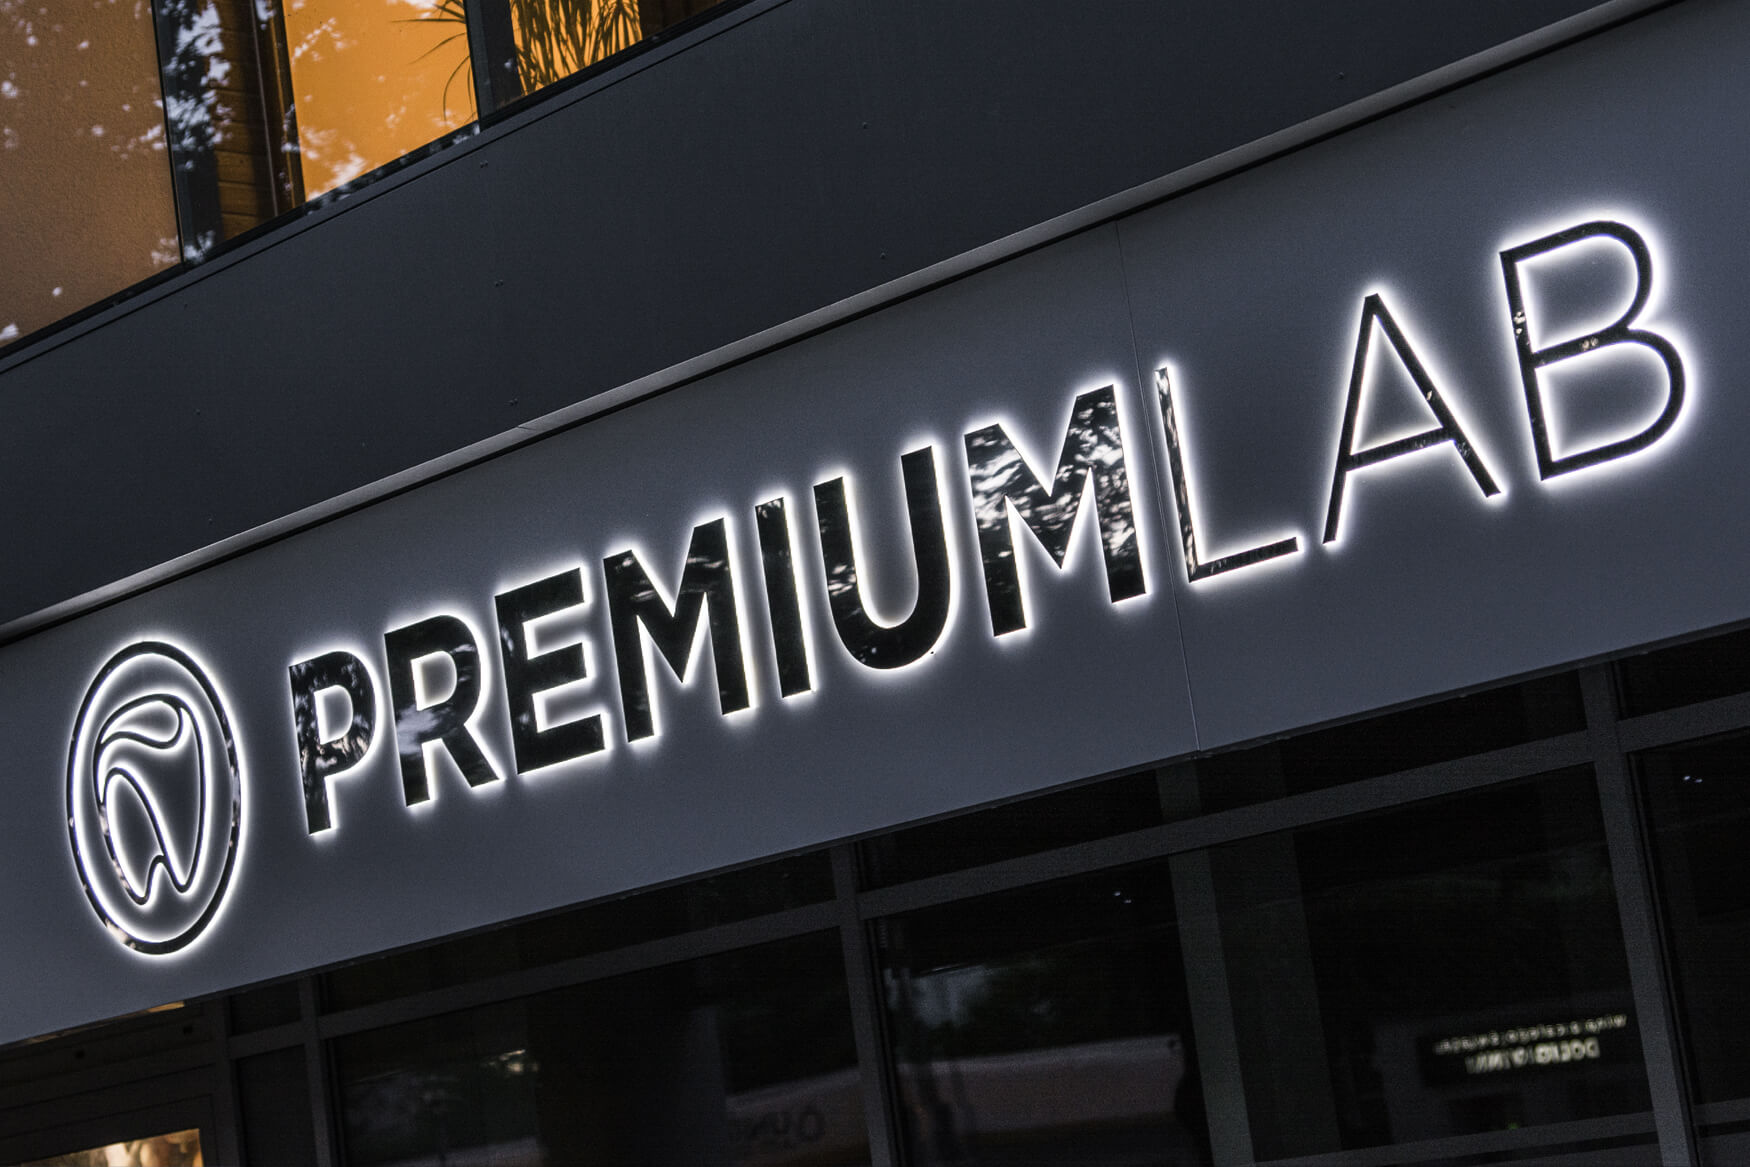 Premiumlab - Premiumlab - company sign placed on an advertising coffer with metal spatial letters